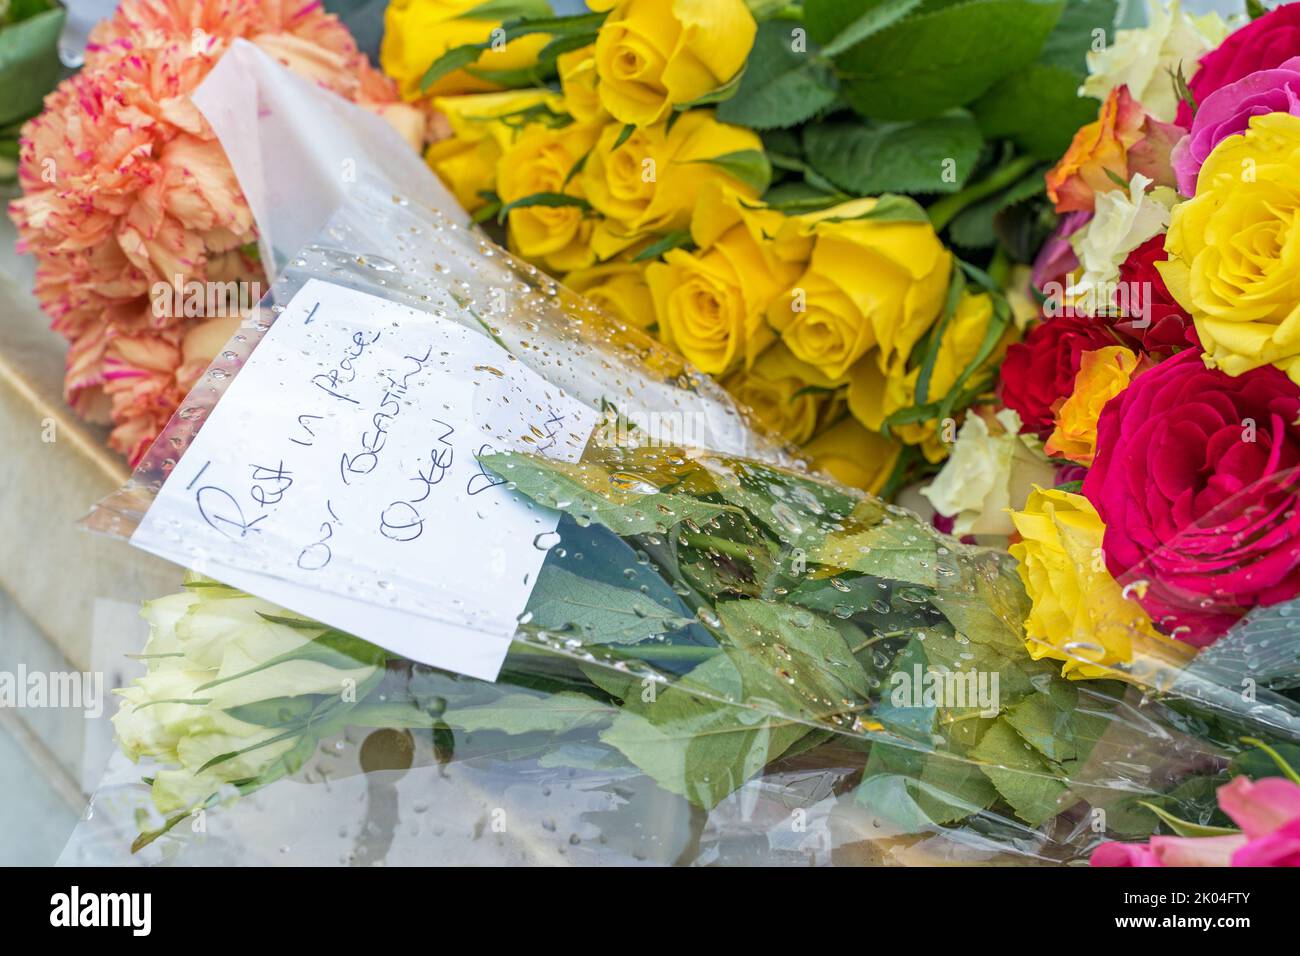 Flowers outside Buckingham Palace remembering Queen Elizabeth II after her death. London - 9th September 2022 Stock Photo